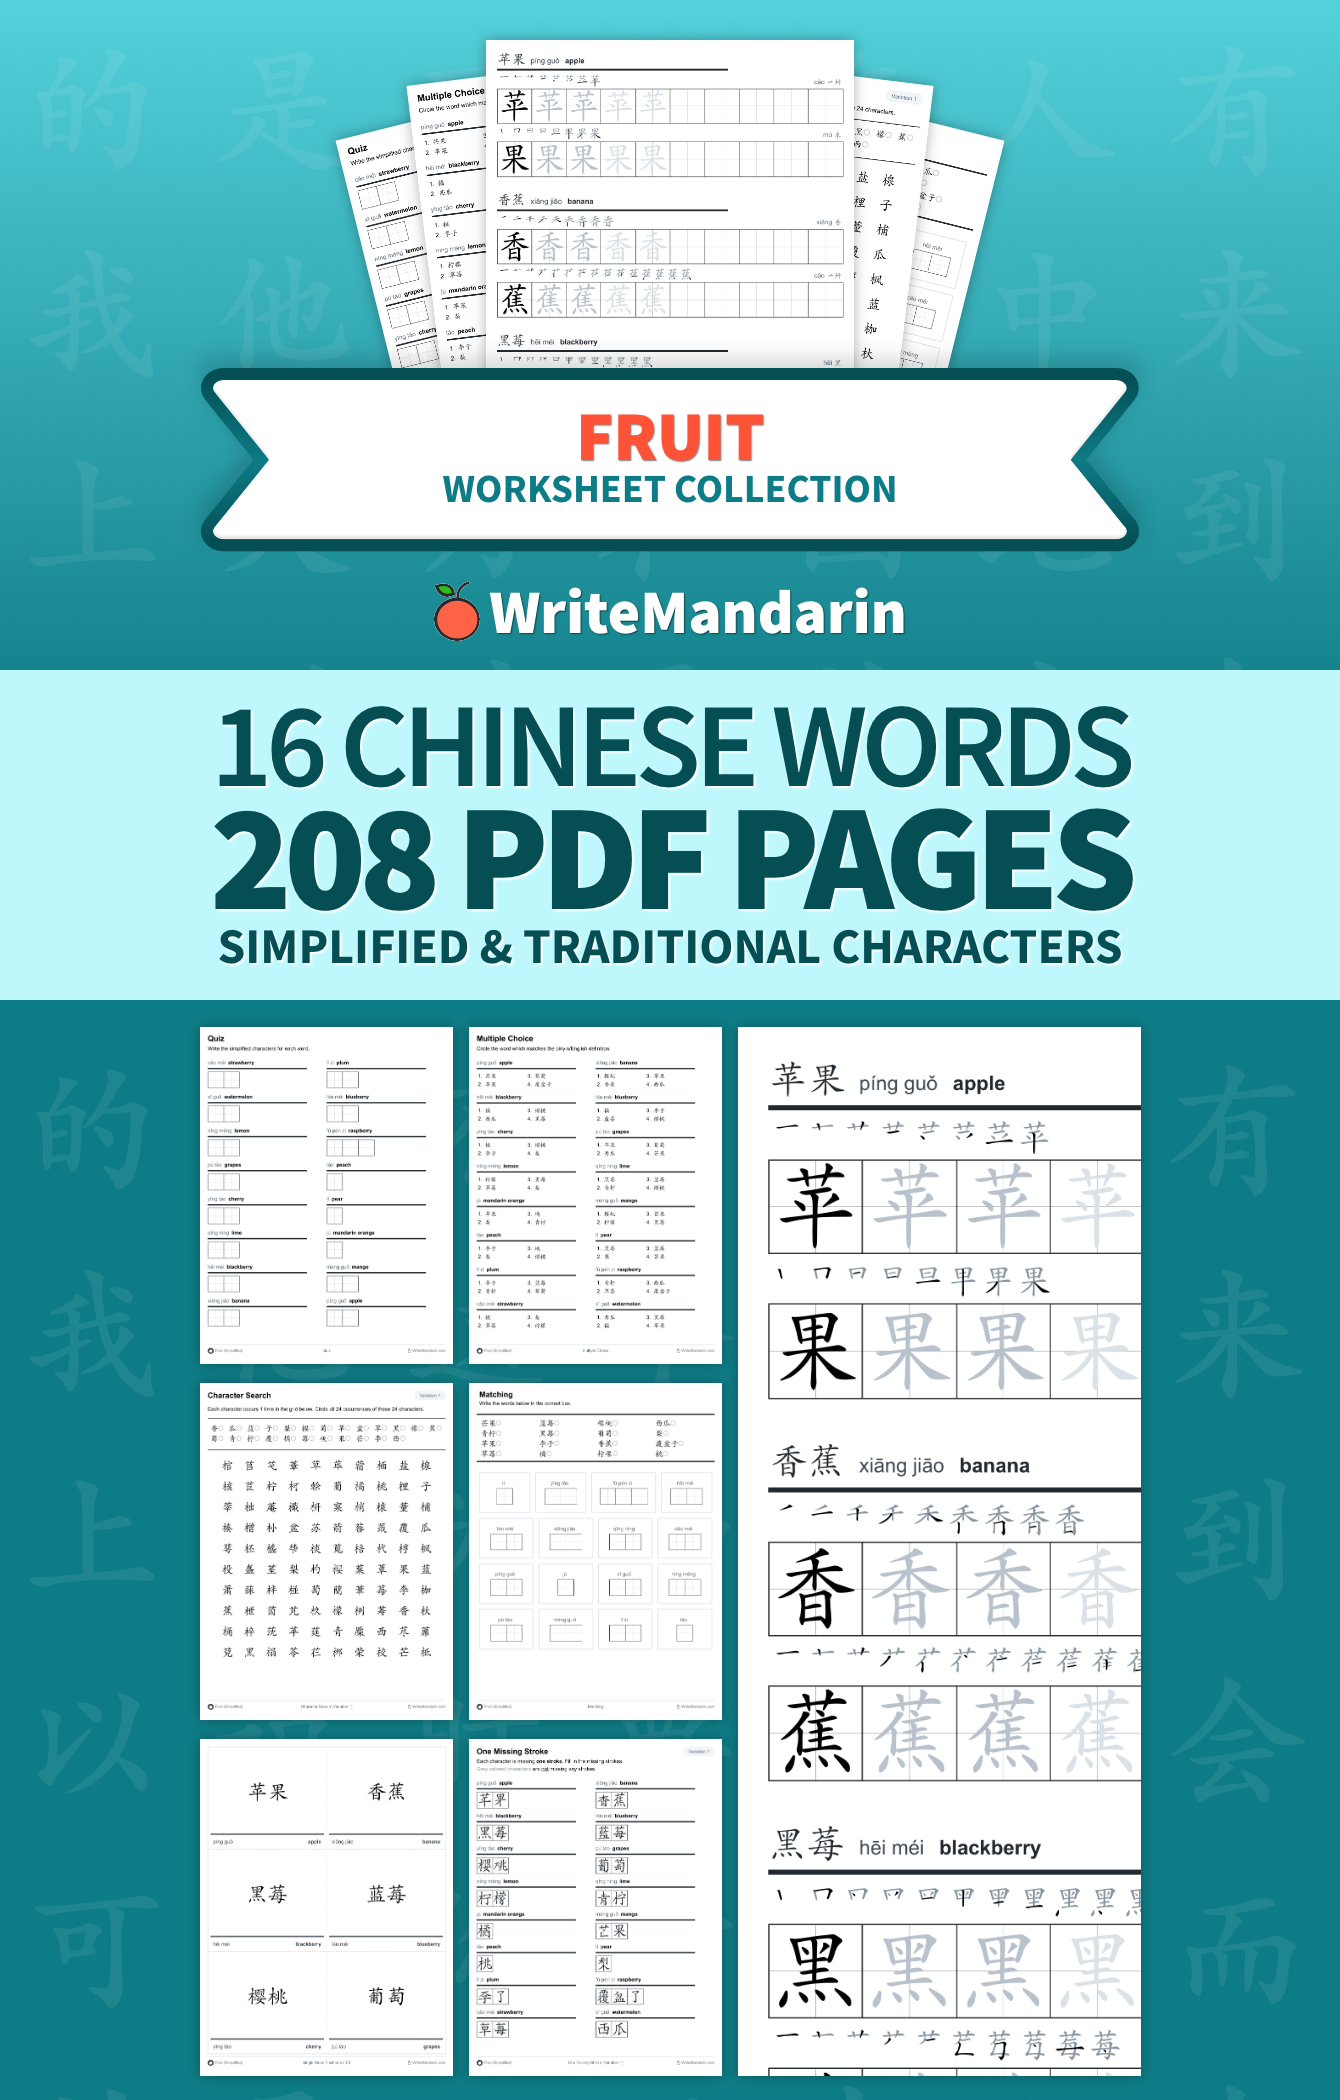 Preview image of Fruit worksheet collection